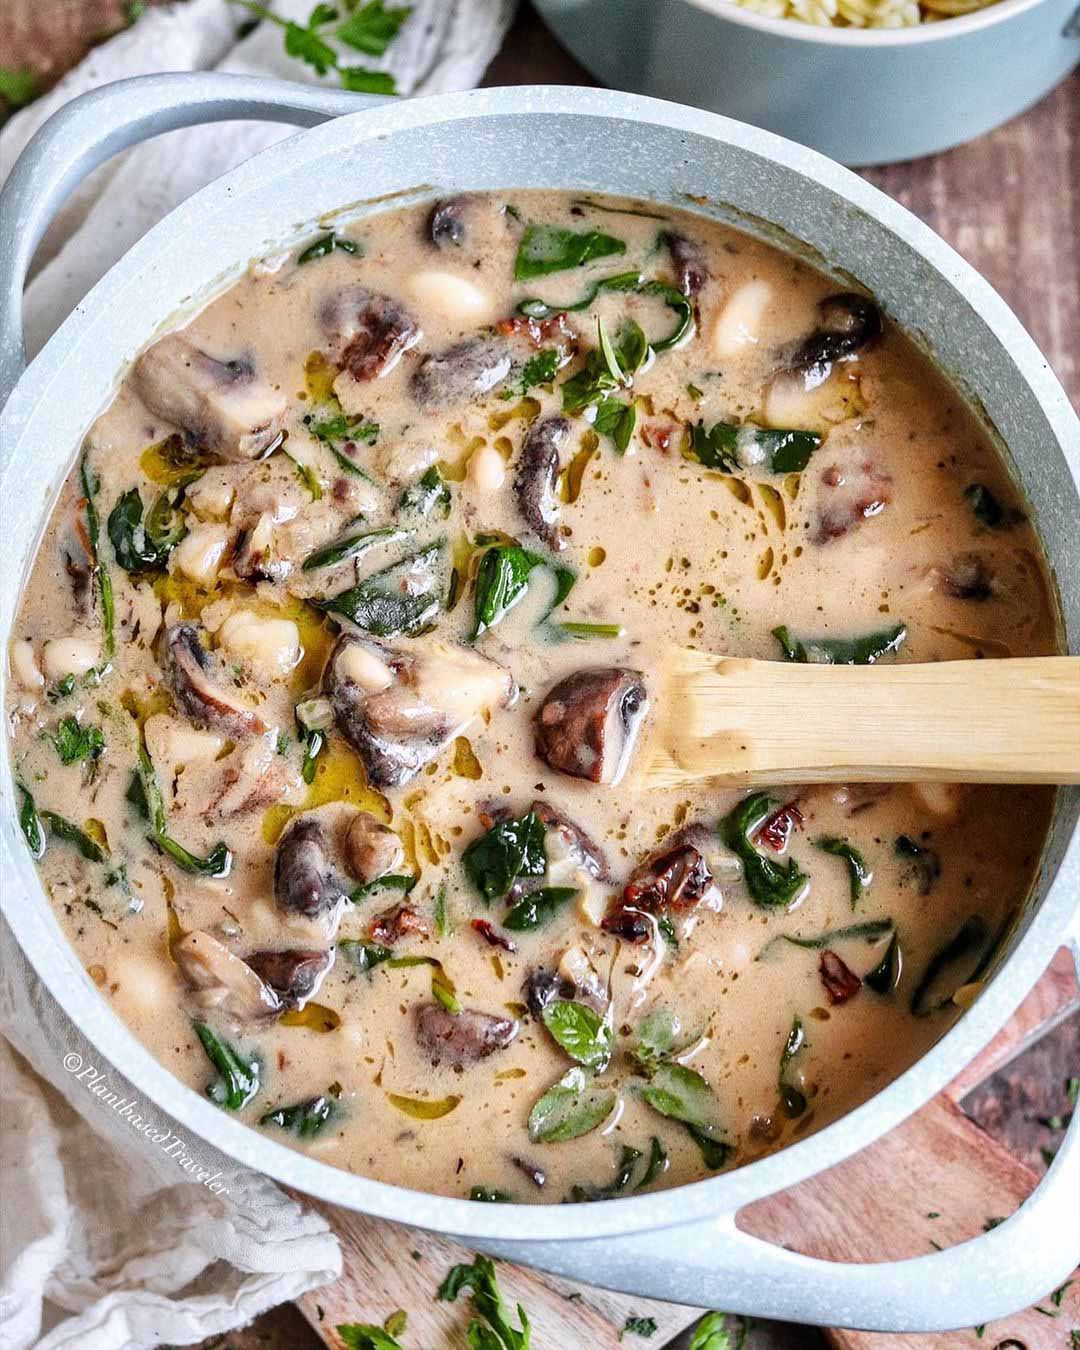 Creamy Mushrooms with Sun-Dried Tomatoes, Spinach and White Beans